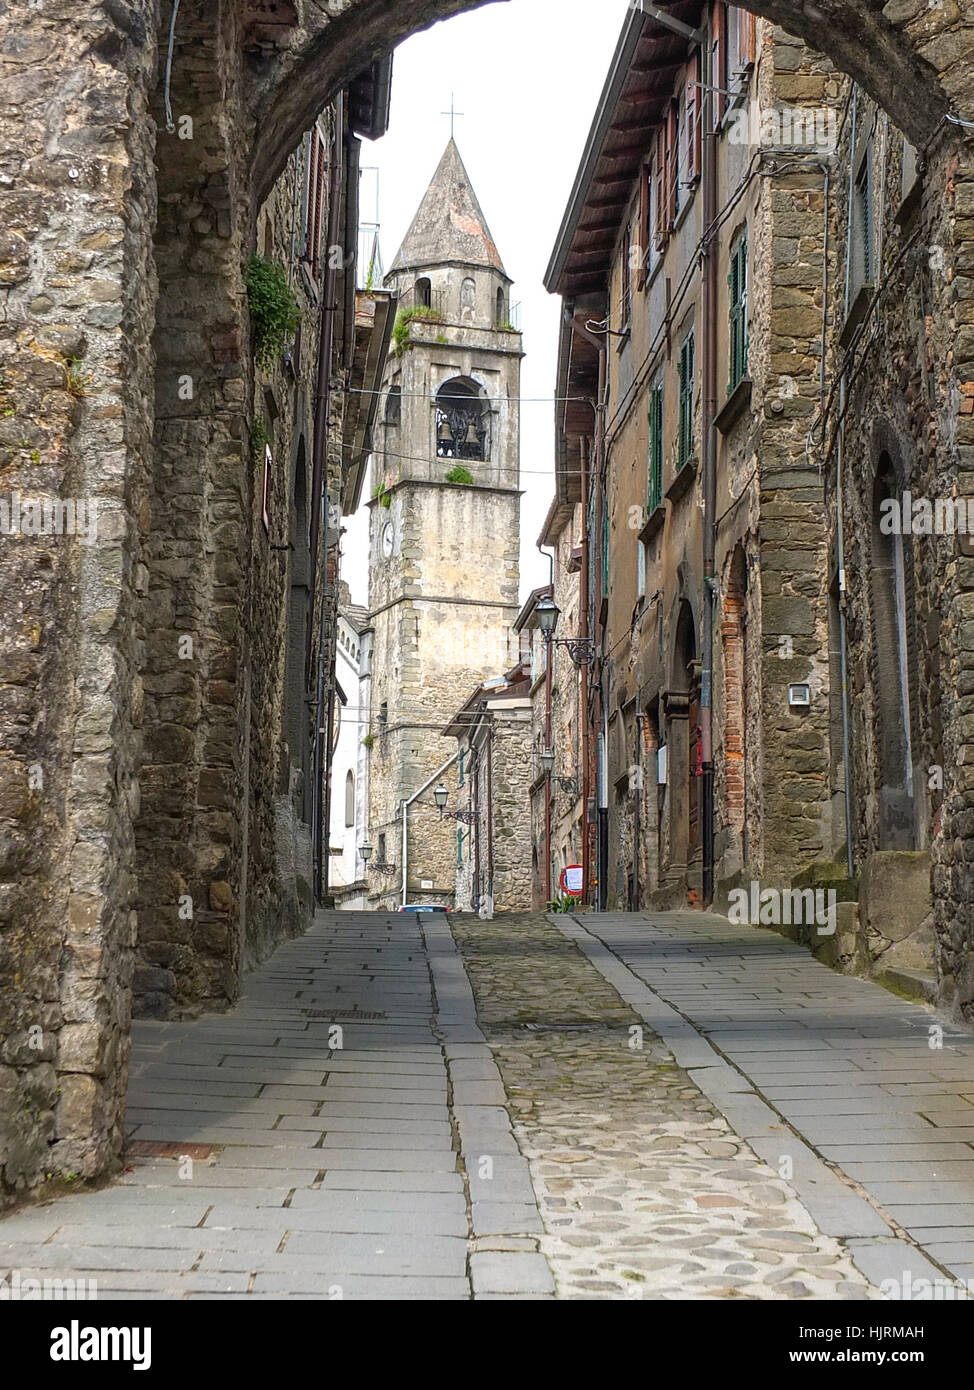 small, tiny, little, short, tuscany, medieval, castle, old, community, village, Stock Photo